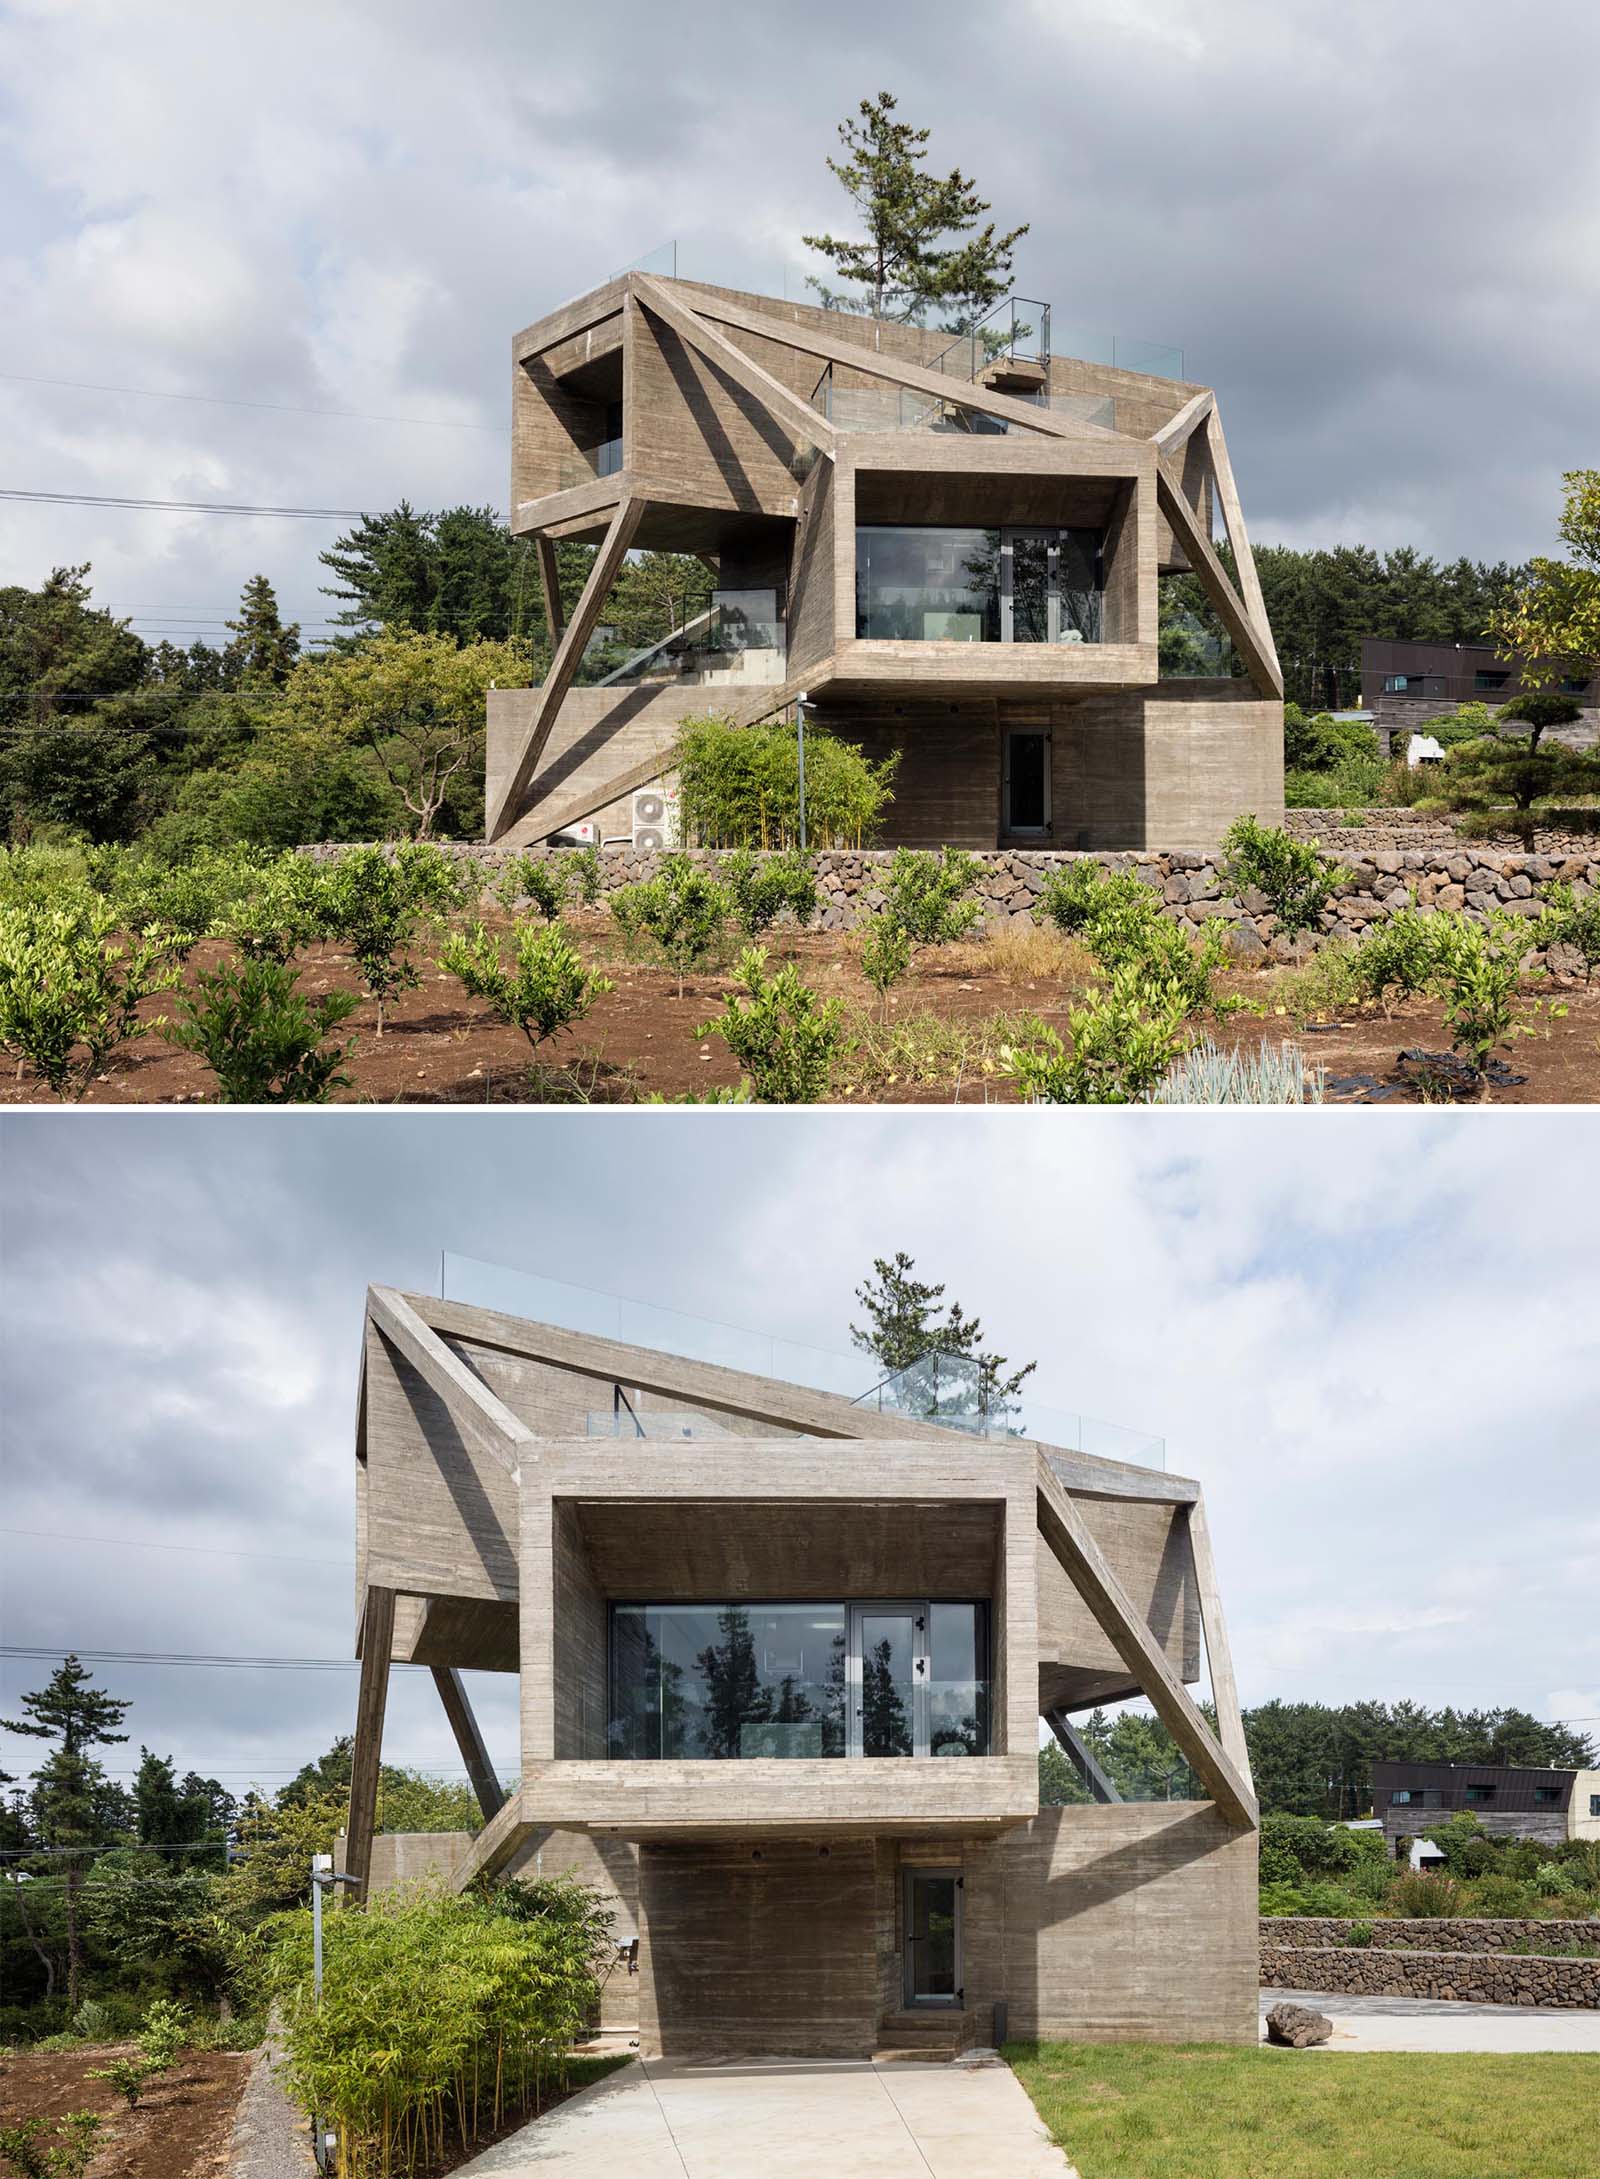 The exterior of this home is striking in its design, with bold geometric shapes made from concrete and angled elements that connect the rotated boxes. Glass balconies and stair railings seamlessly blend into the concrete design. 